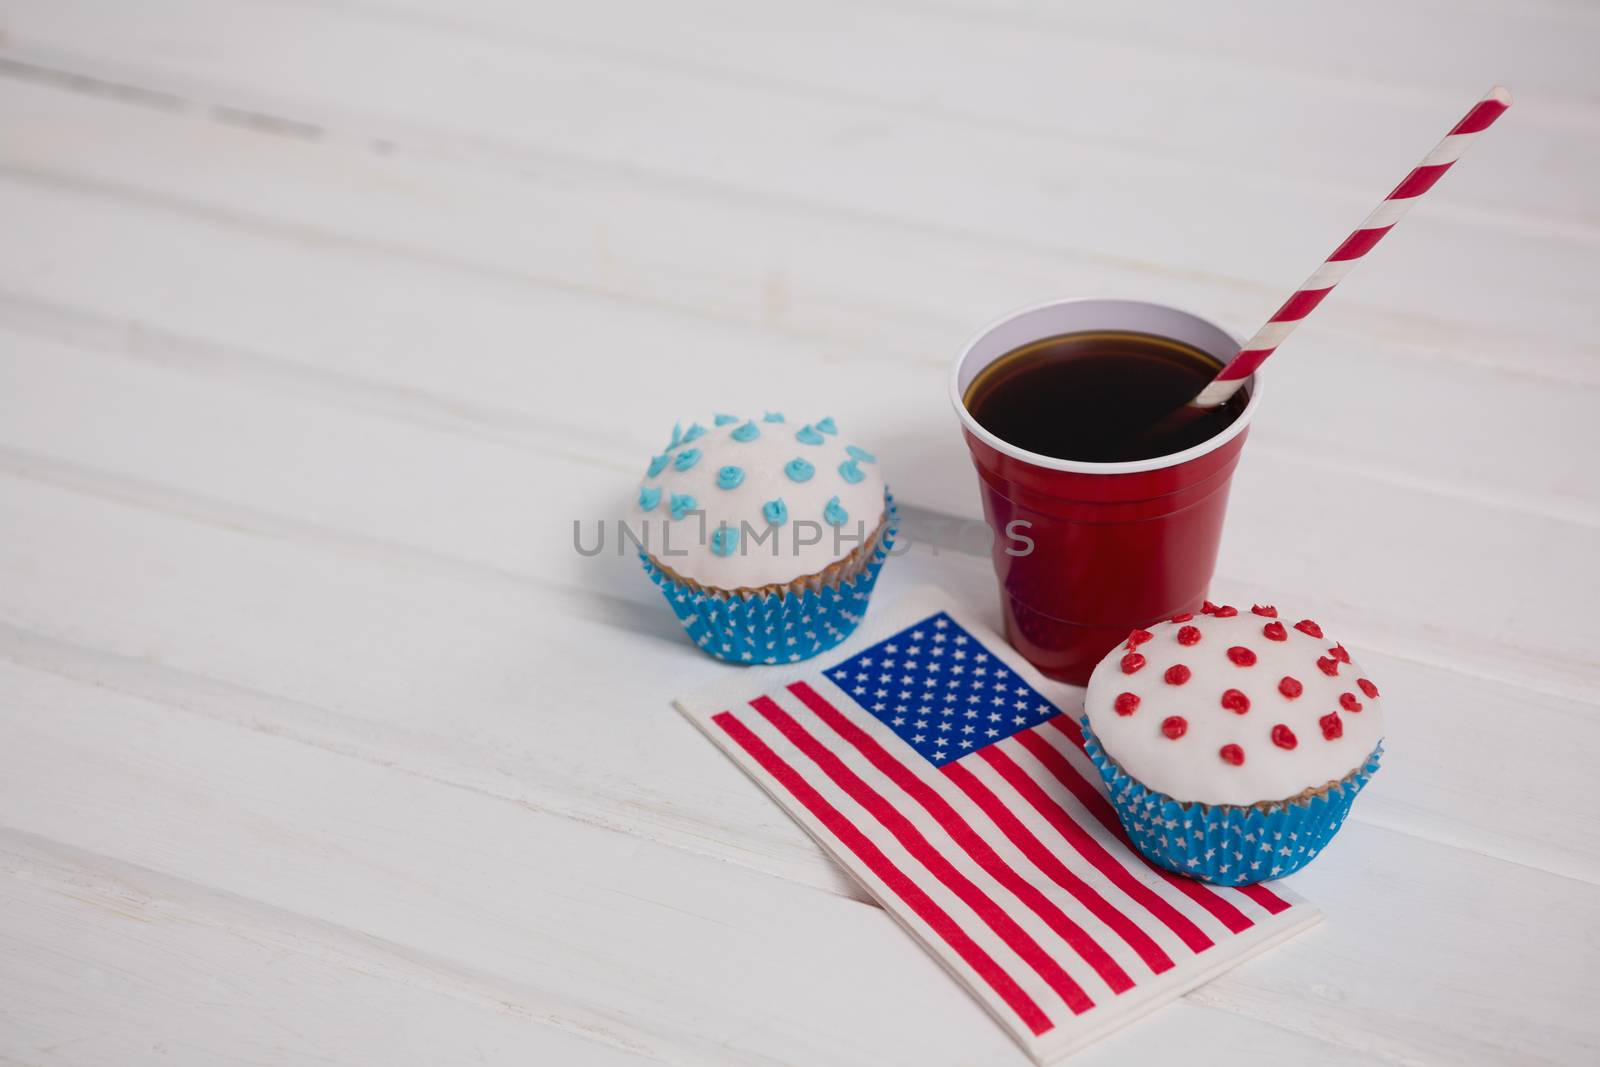 Decorated cupcakes and cold drink with 4th july theme by Wavebreakmedia